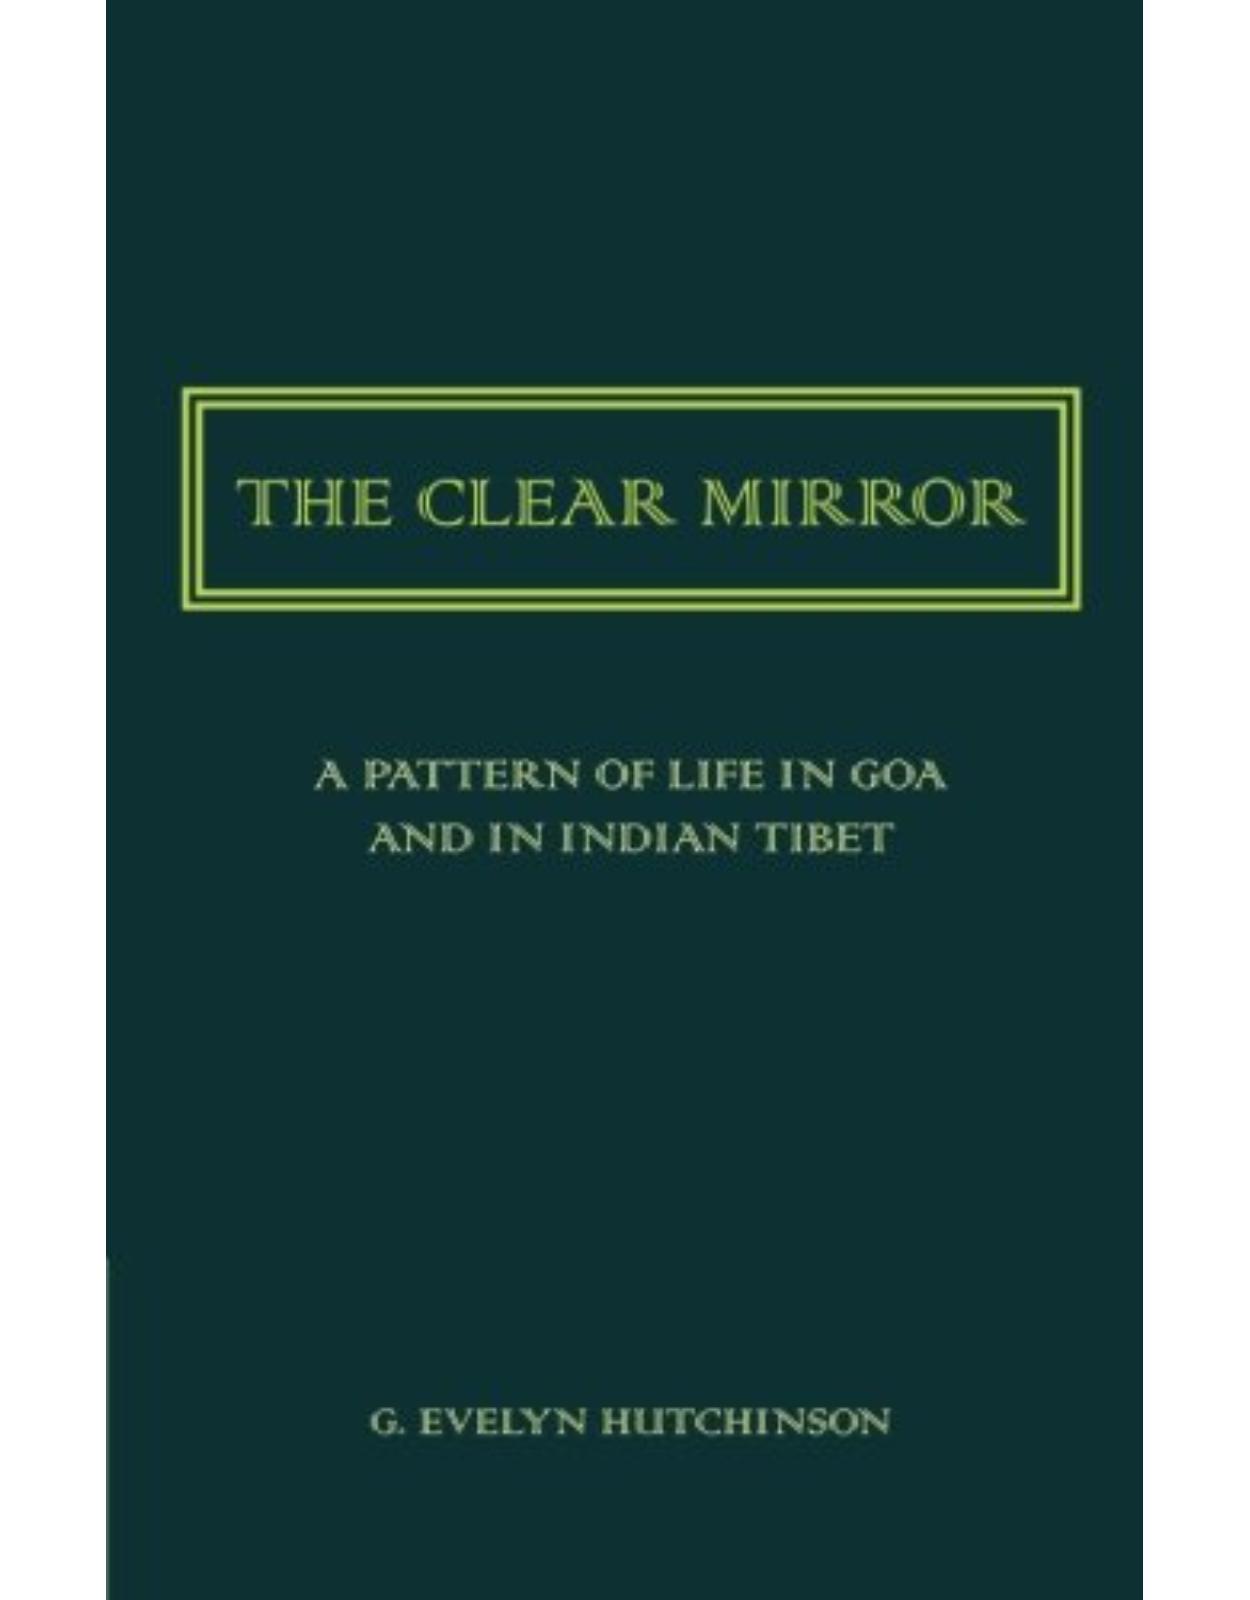 The Clear Mirror: A Pattern of Life in Goa and in Indian Tibet